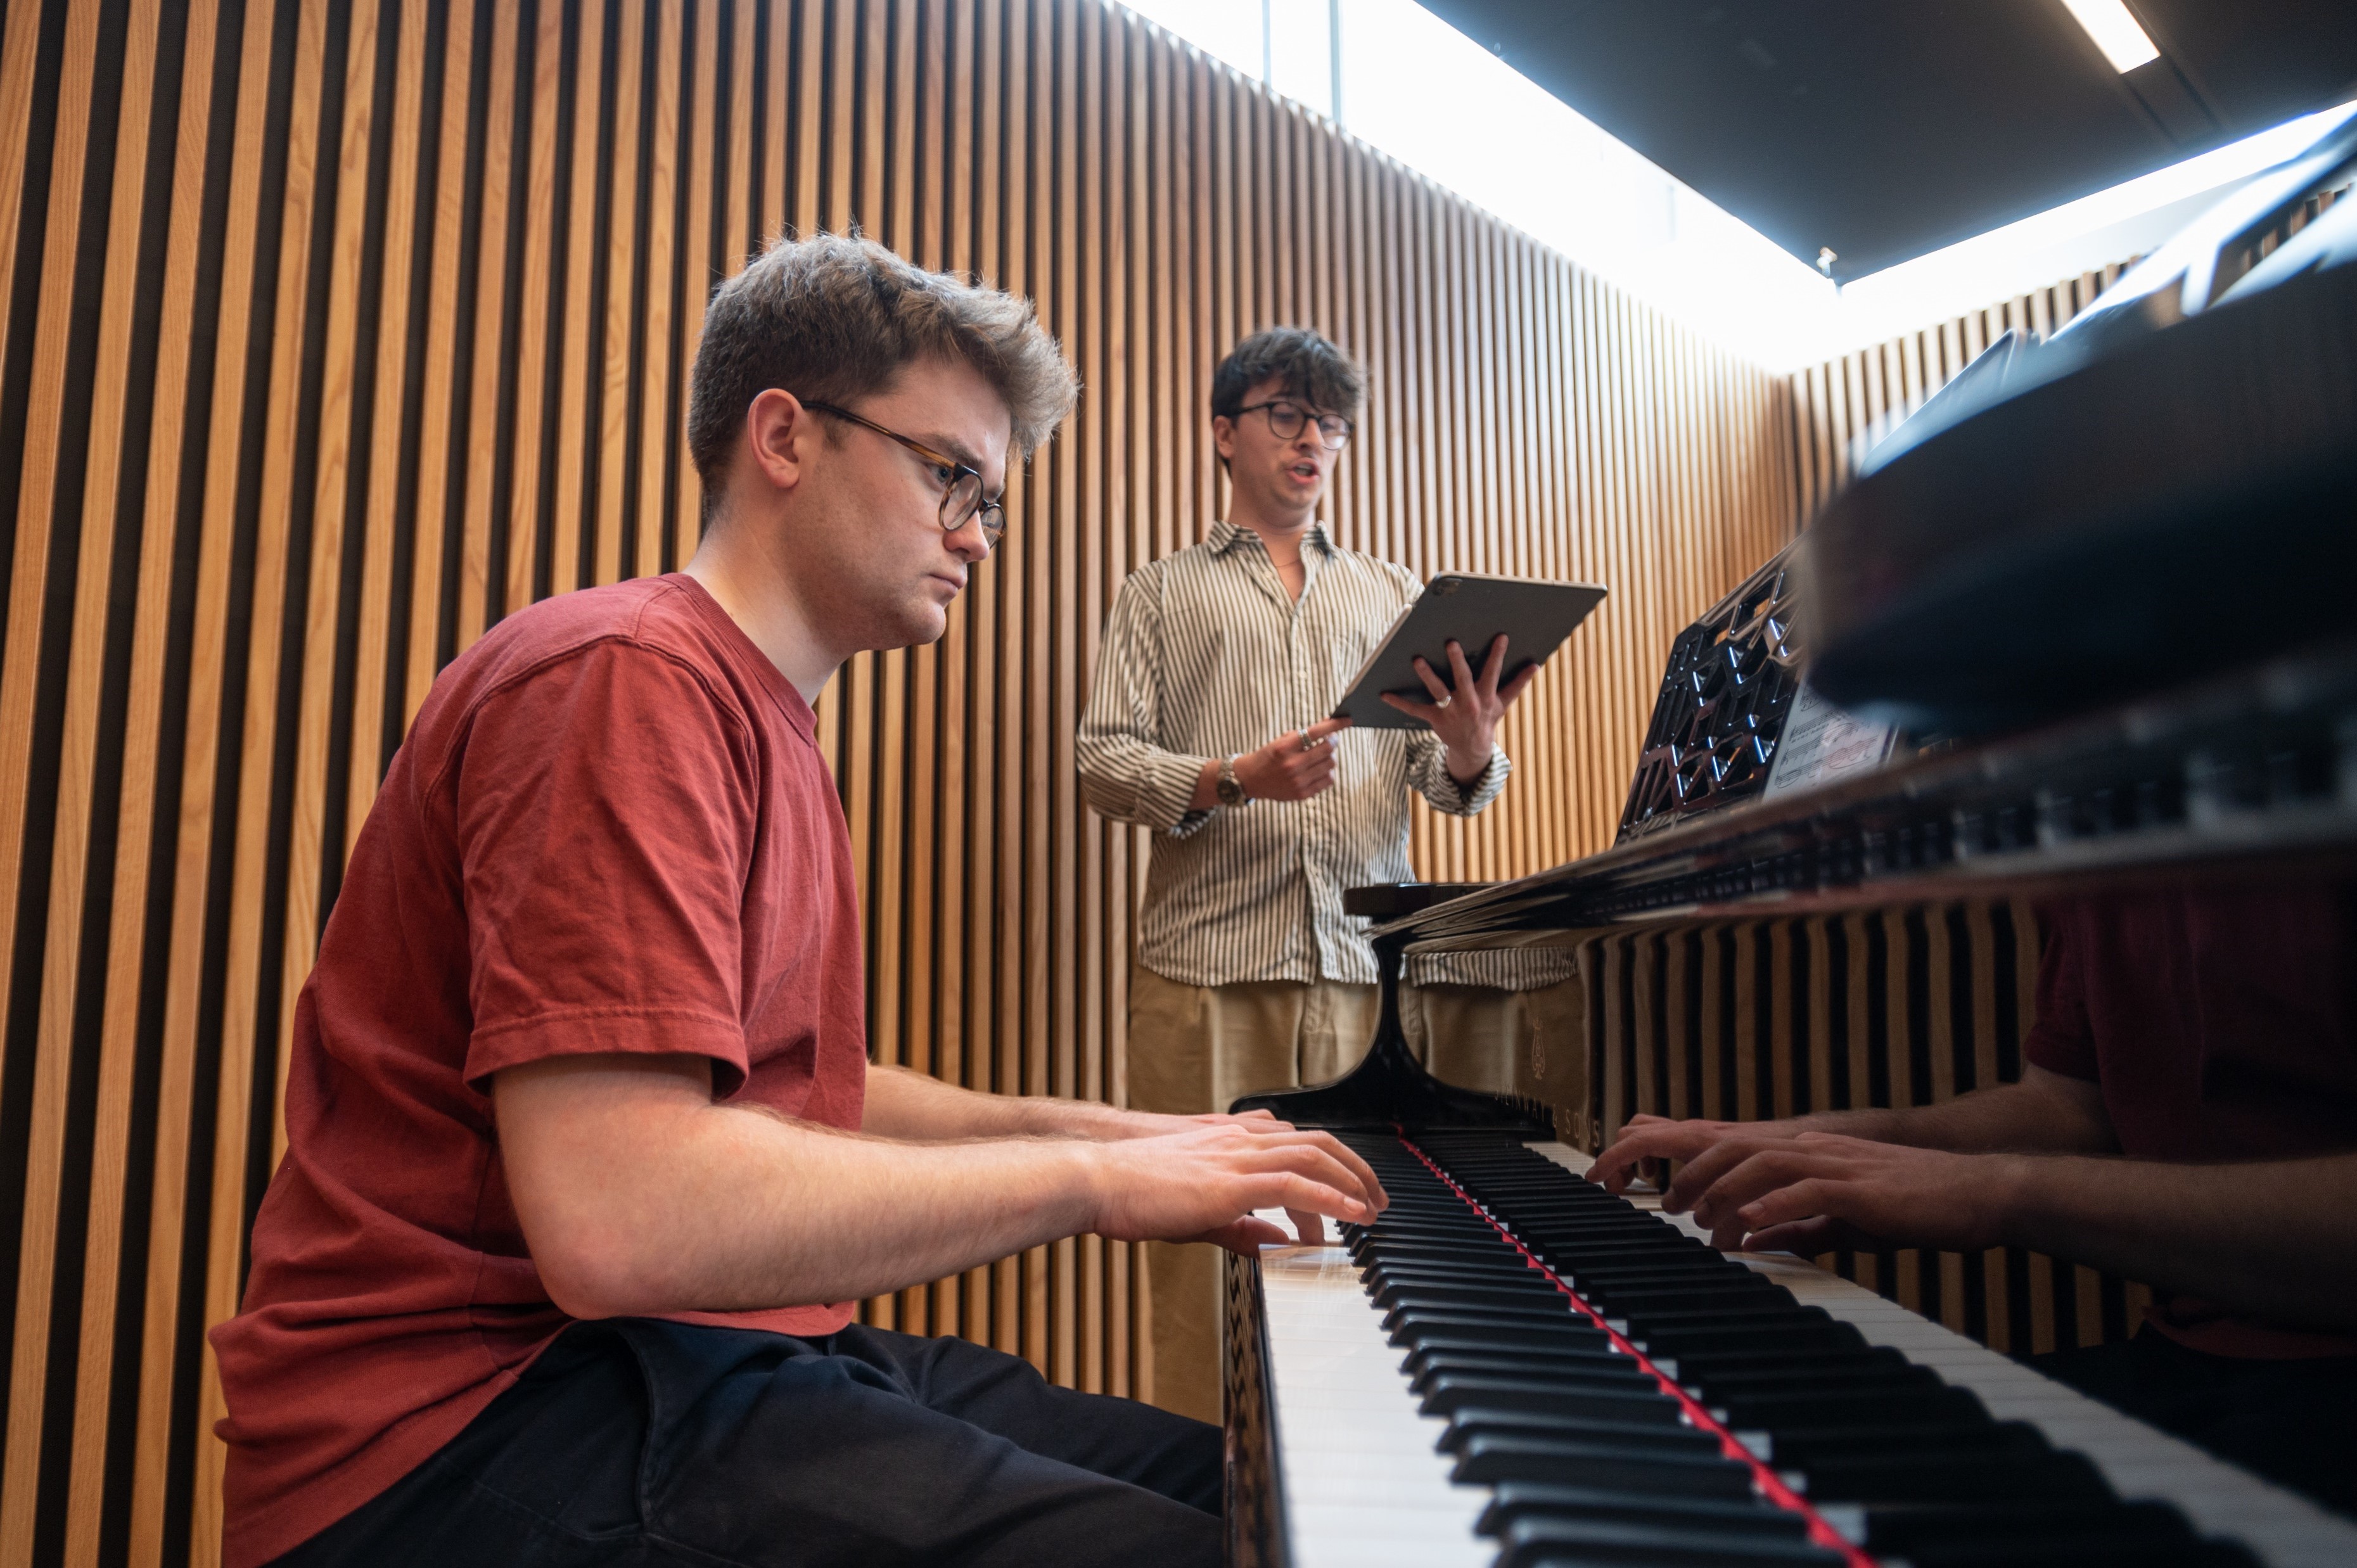 Student singing while another accompanies on a piano